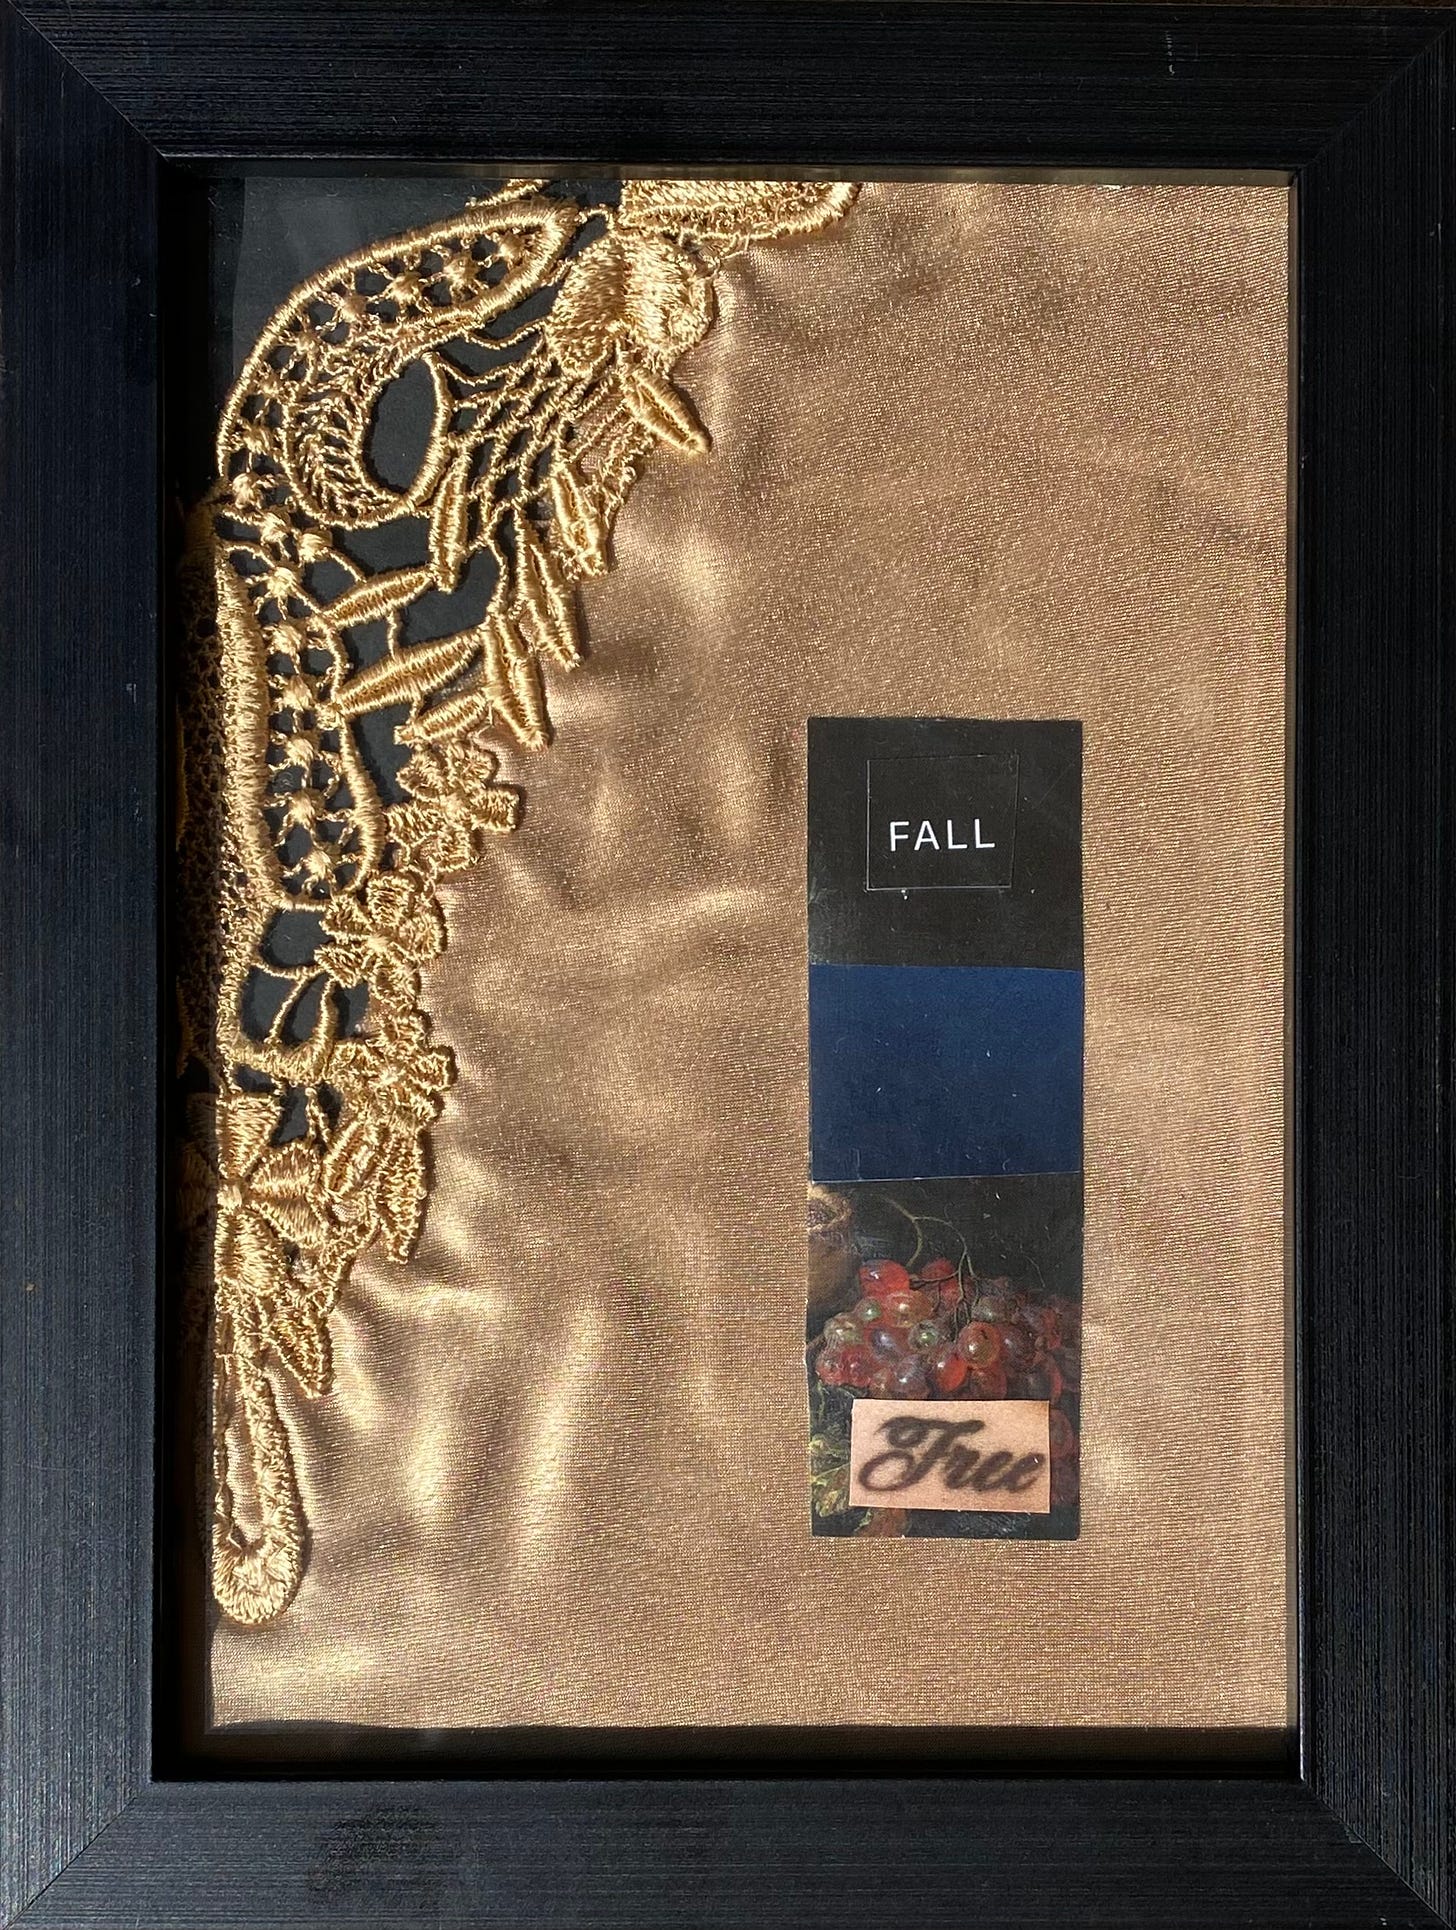 A collage image in the shape of a long rectangle. The top third is black with the word "fall", the middle is dark blue, and the bottom third is an image of a still life painting of grapes with a tattoo of the word "free" on top. The collage is on top of a piece of a gold silk and lace pajama top. Contained in a black matte frame.